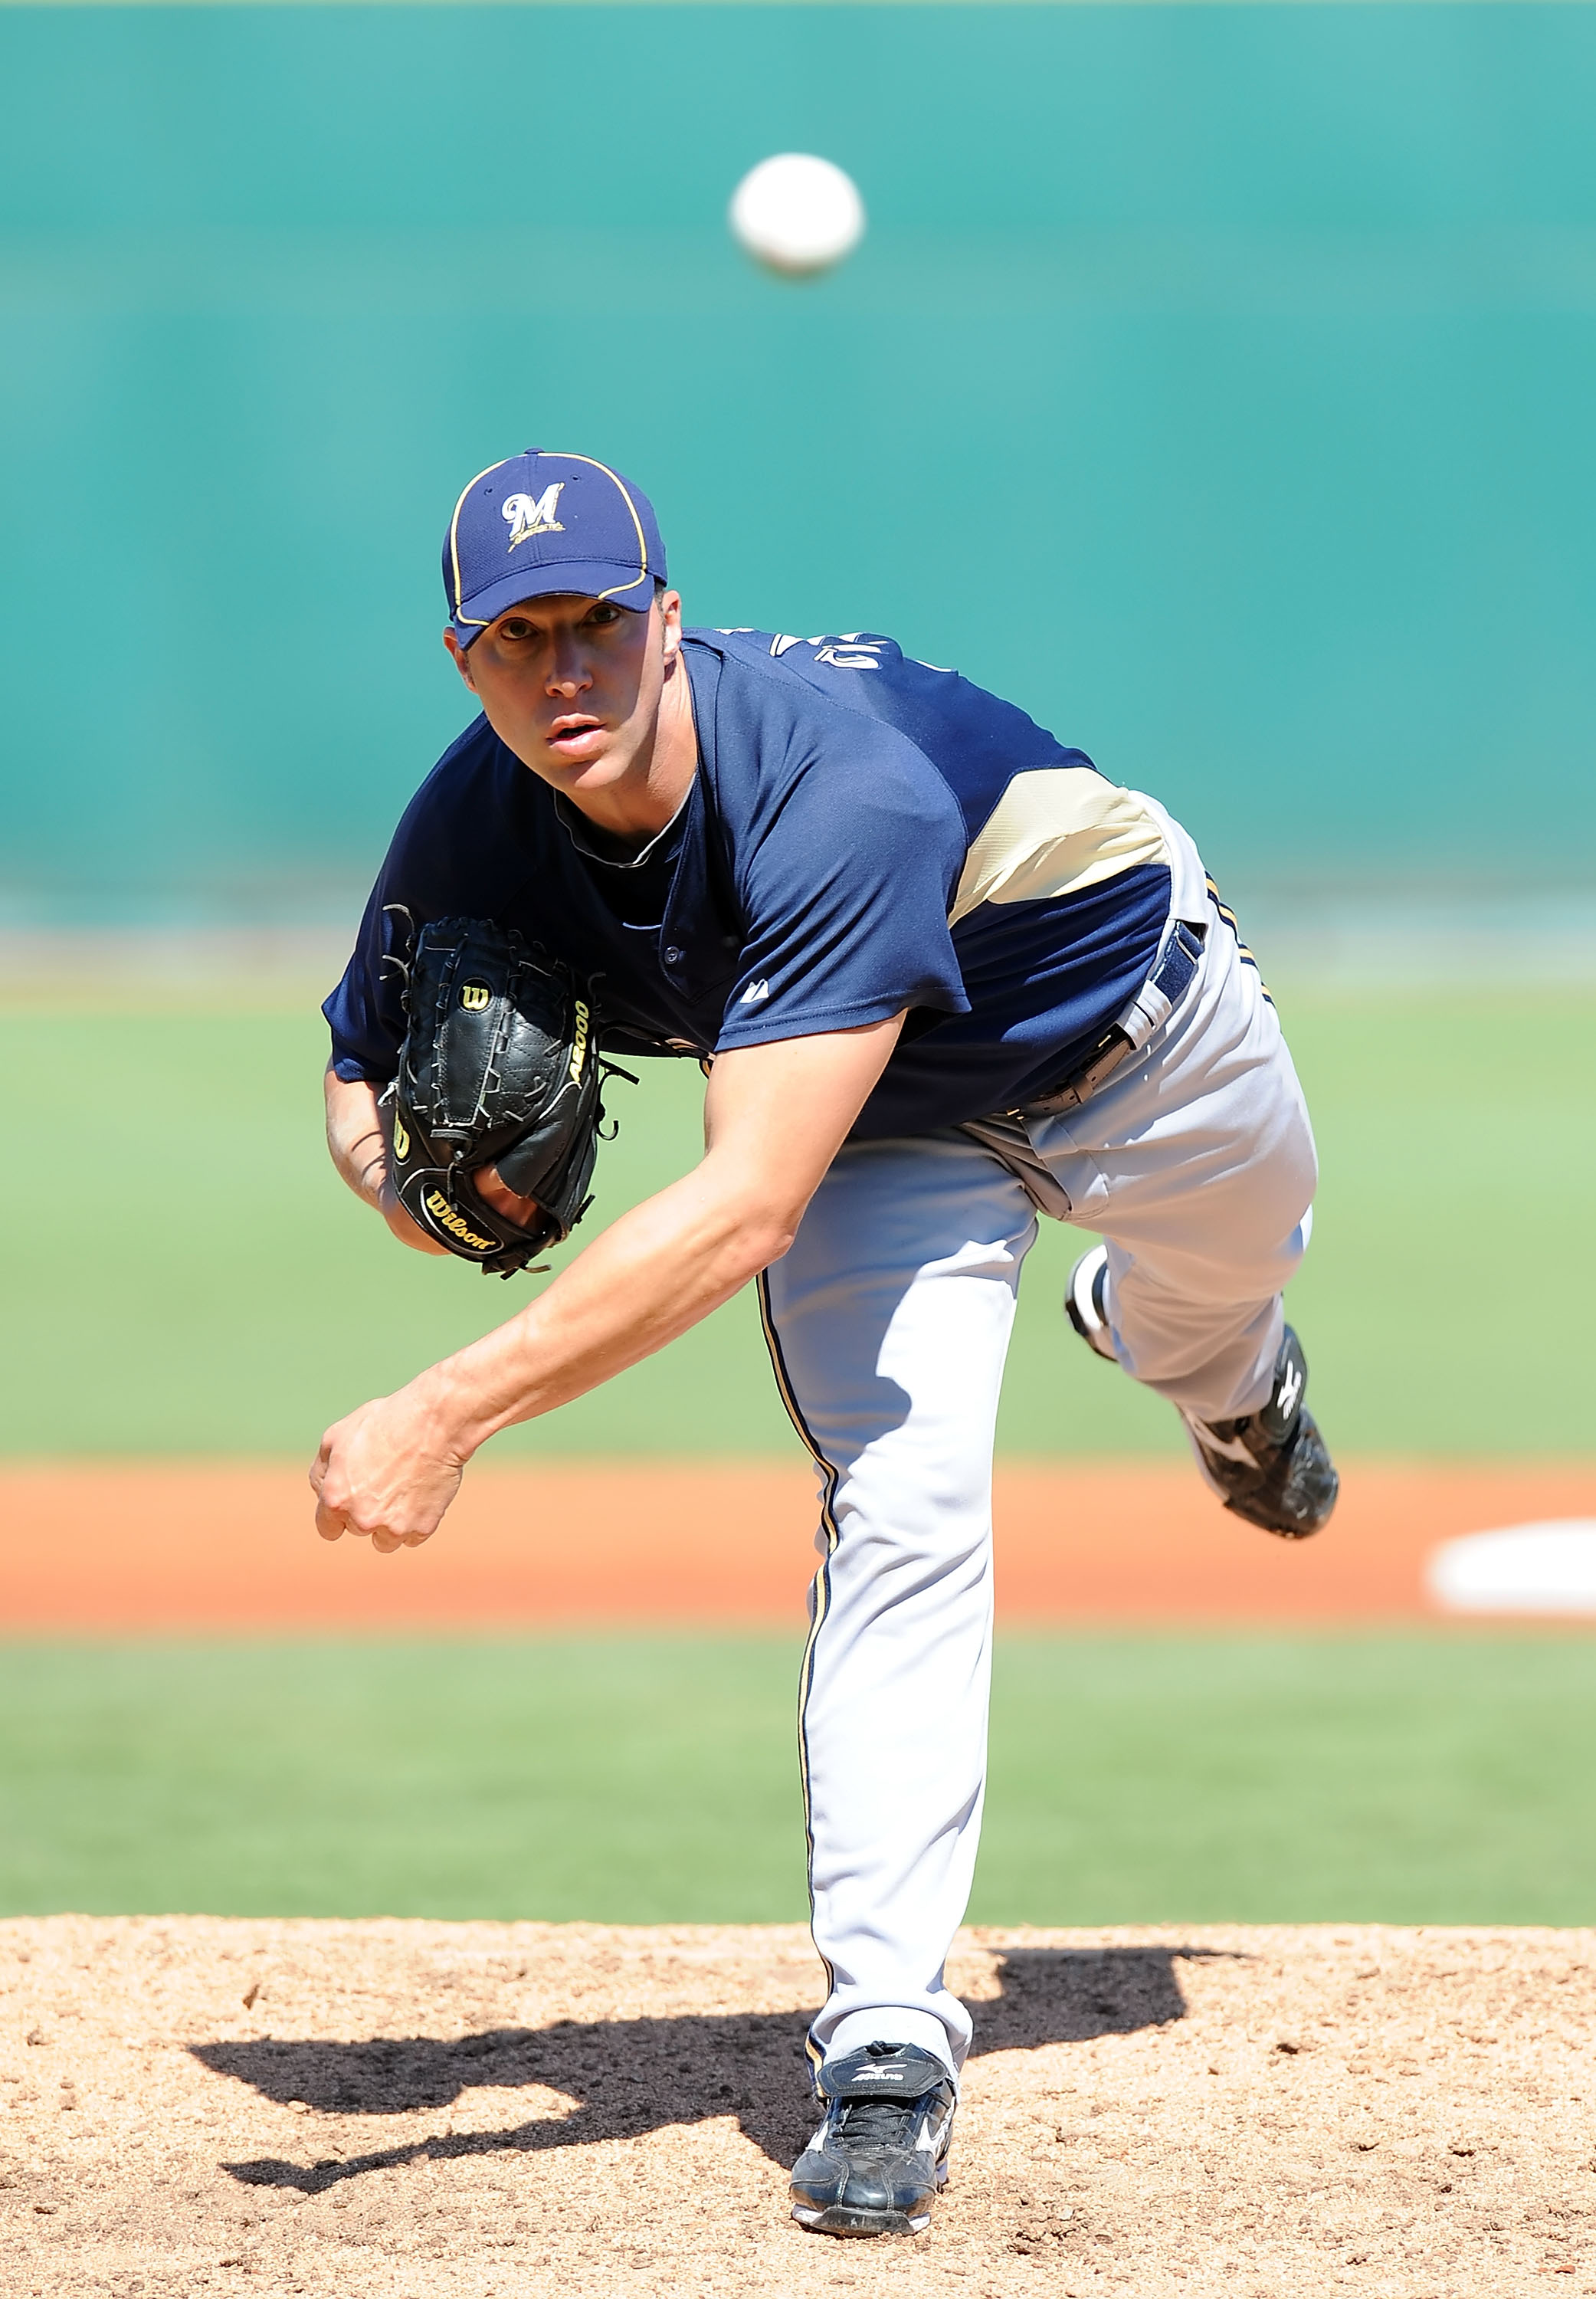 GOODYEAR, AZ - MARCH 11:  Chris Capuano #39 of the Milwaukee Brewers pitches during a Spring Training game against the Cincinnati Reds on March 11, 2010 at Goodyear Ballpark in Goodyear, Arizona.  (Photo by Lisa Blumenfeld/Getty Images)